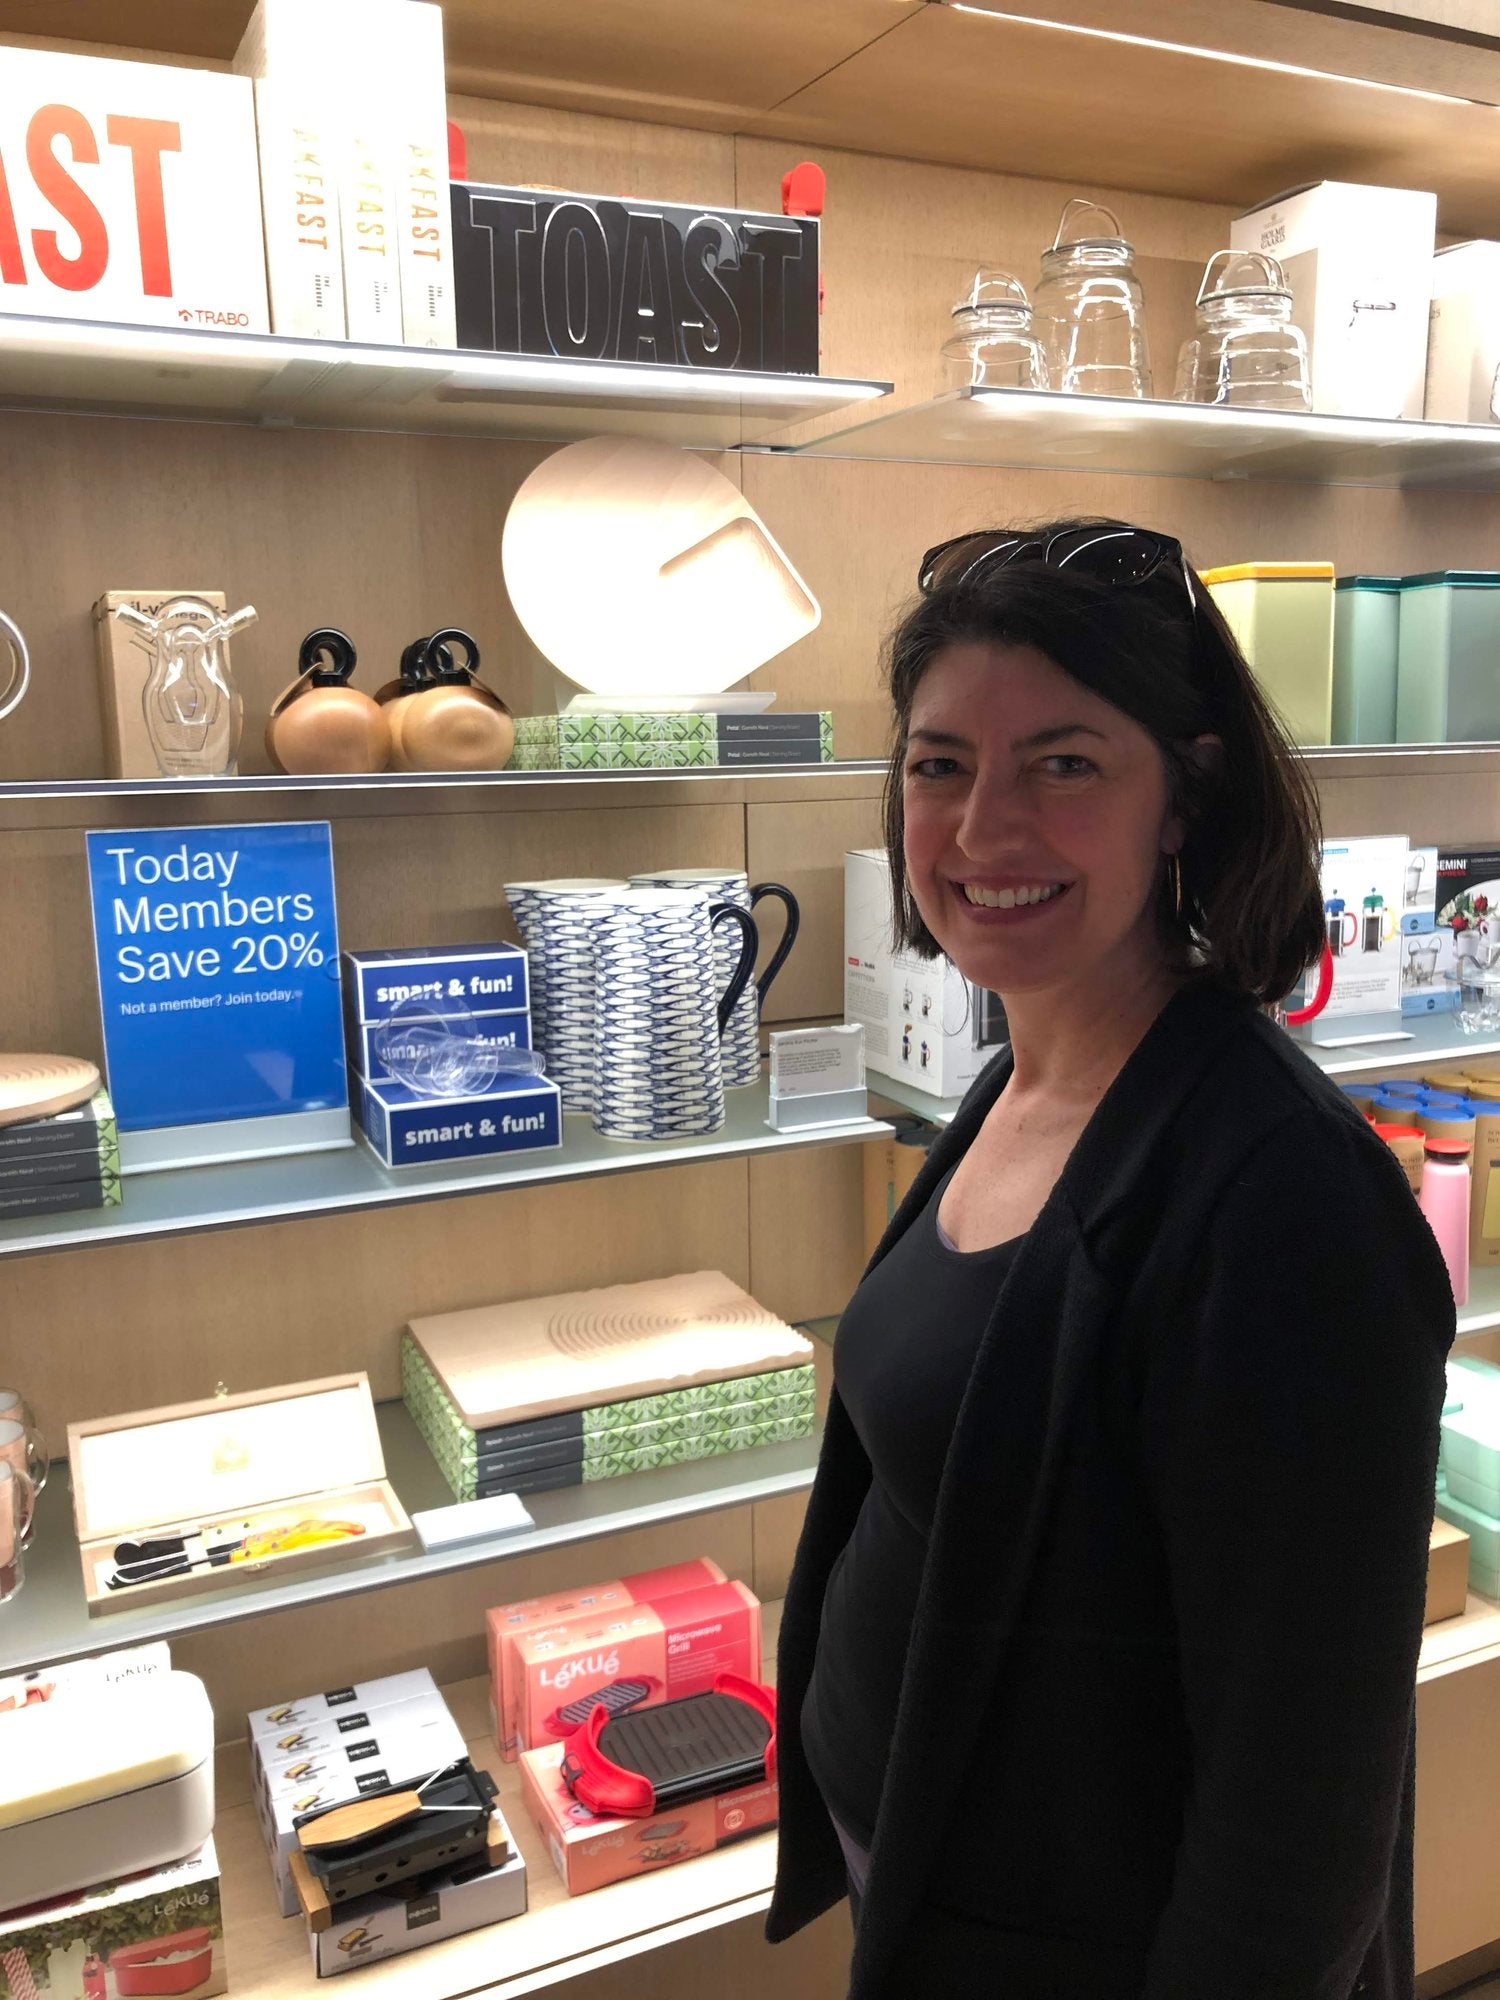 Pam Daniels standing in front of shelves in the MoMA Design Store where Visual Measuring Cups are displayed